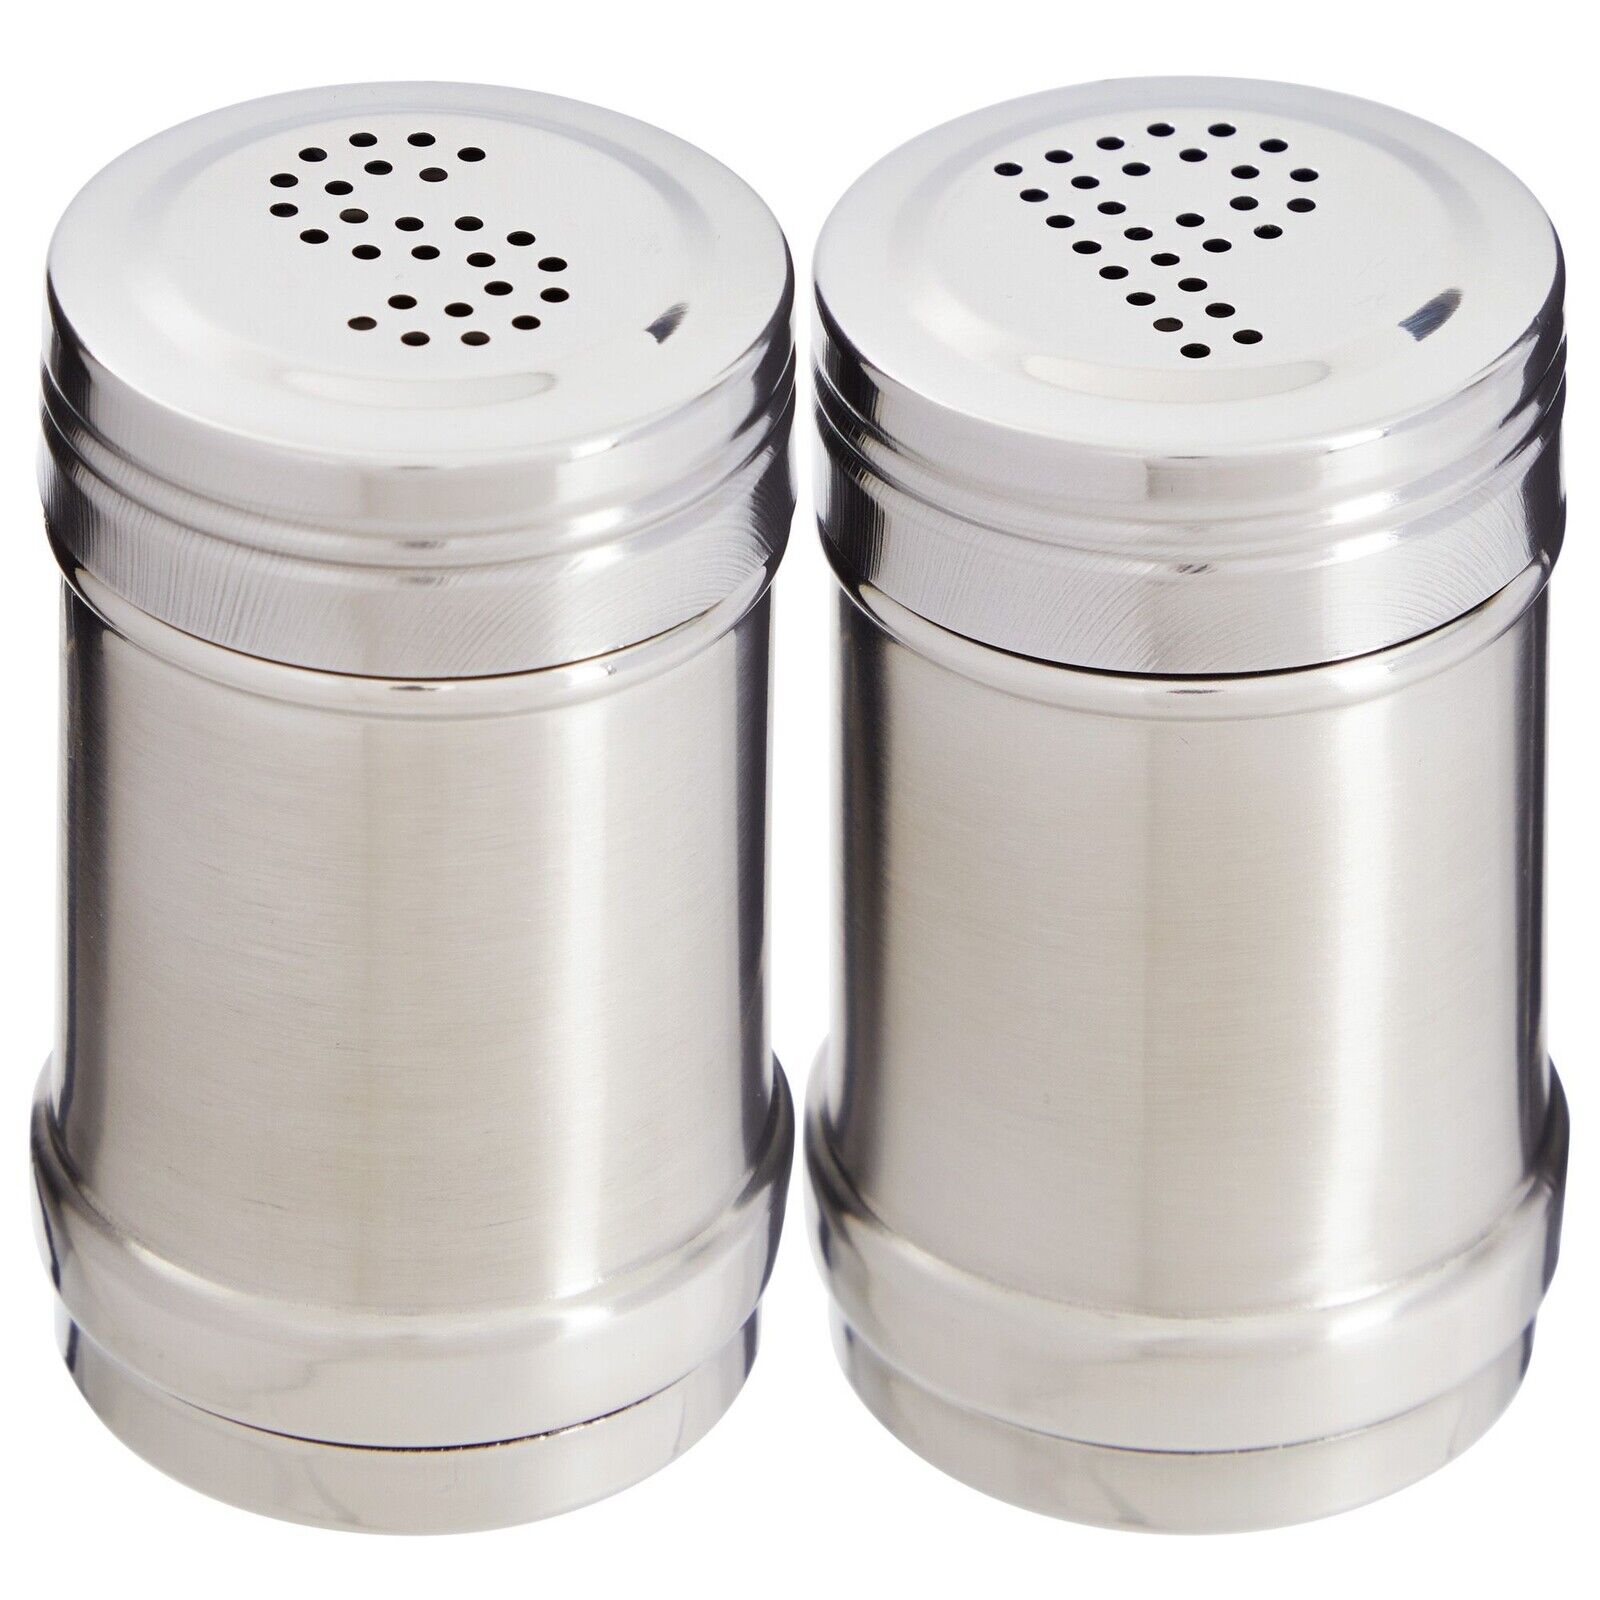 2oz Stainless Steel Metal Salt and Pepper Shakers for Kitchen, 3.5 in